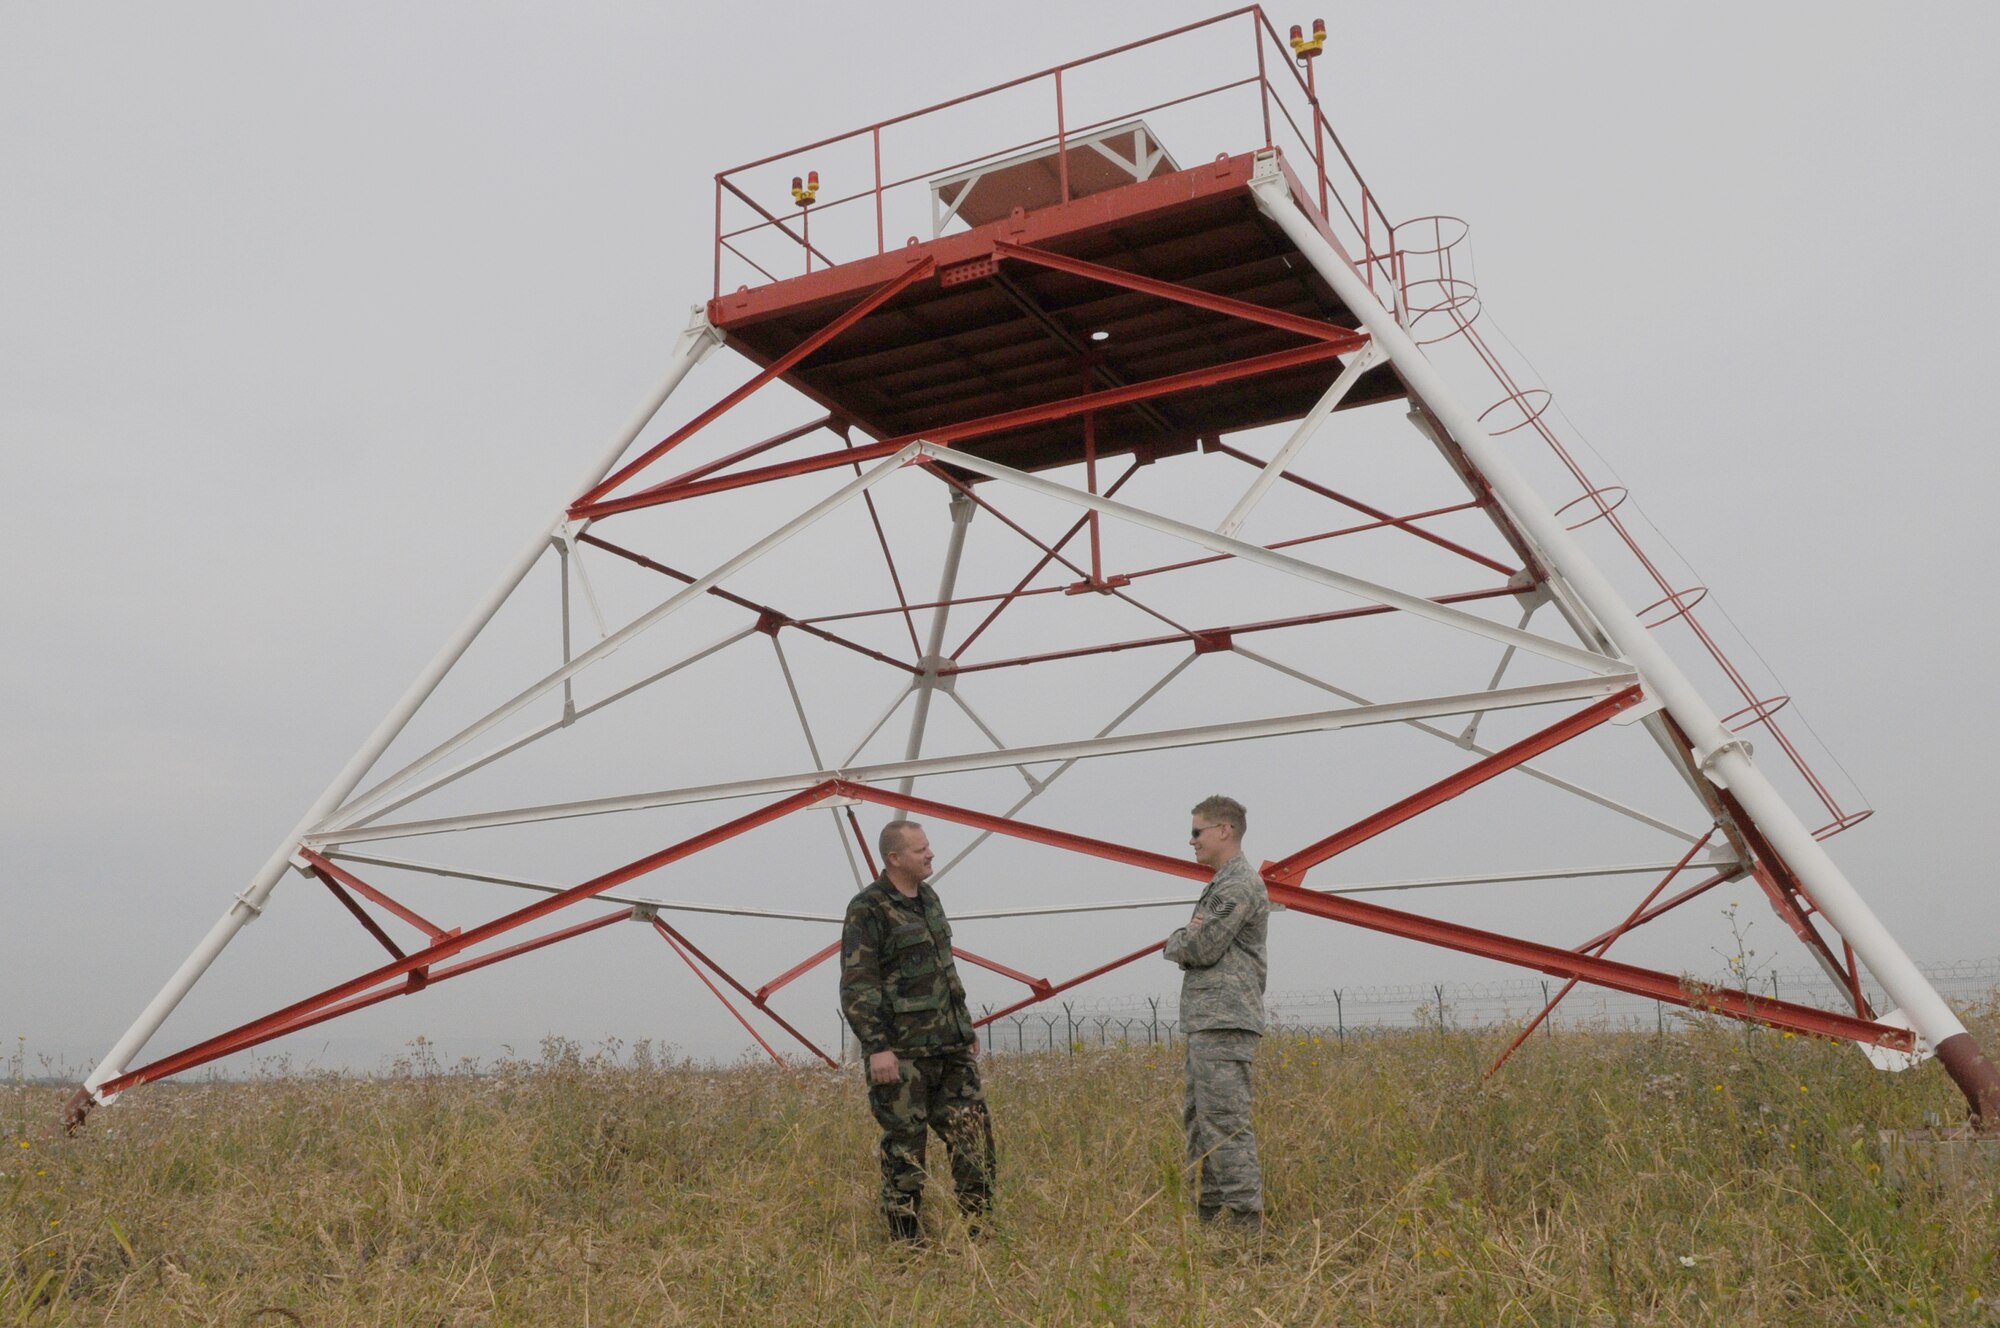 U.S. Air Force Master Sgt. Jerry McDonald and Tech. Sgt. Aaron Tibbits, both 1st Communications Maintenance Squadron special communications team members, discuss what is needed for the installation of the Tactical Air Navigation System during the final site inspection, Camp Turzii, Romania, Sept. 17, 2009. The installation of the TACAN will provide better communication capabilities between the air and ground forces in the area, and it will also help strengthen the bonds between the United States and the host nation. (U.S. Air Force photo by Airman 1st Class Alexandria Mosness)